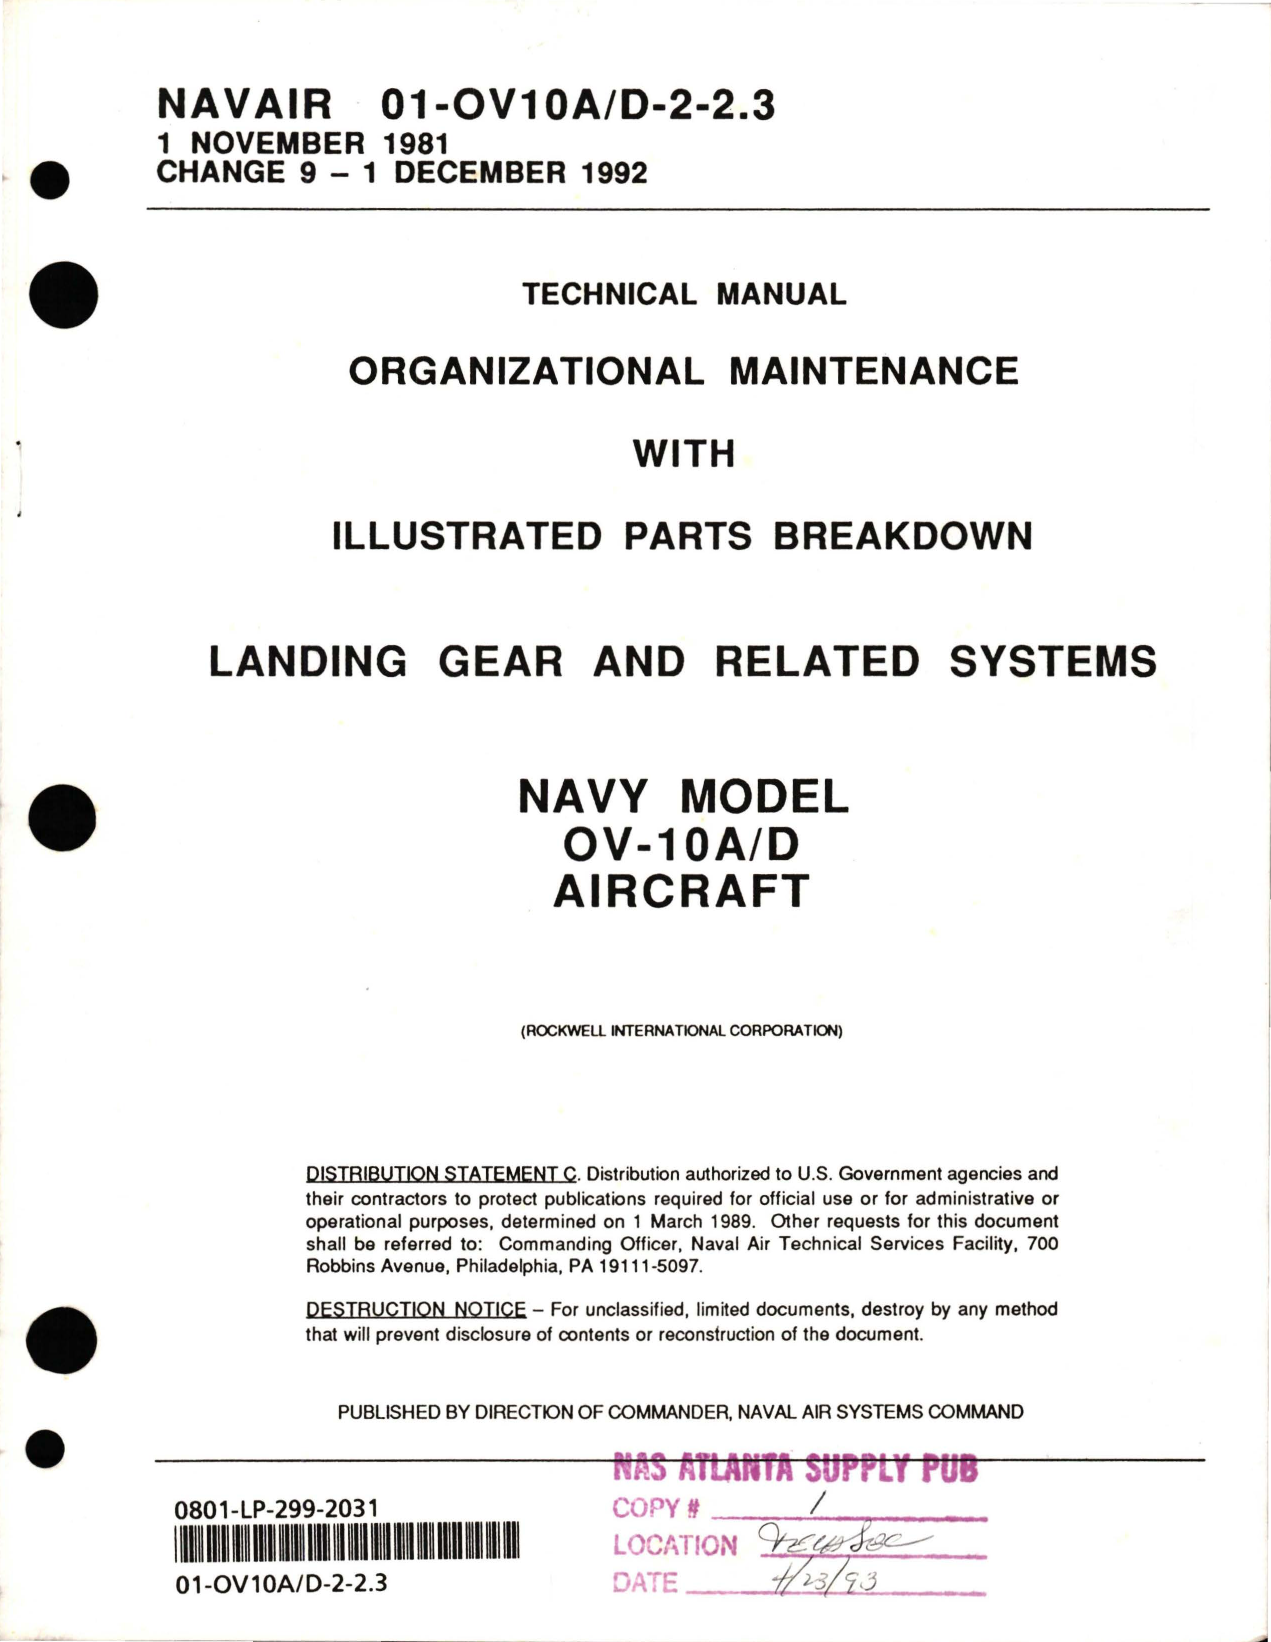 Sample page 1 from AirCorps Library document: Organizational Maintenance with Illustrated Parts Breakdown for Landing Gear and Related Systems for OV-10A/D